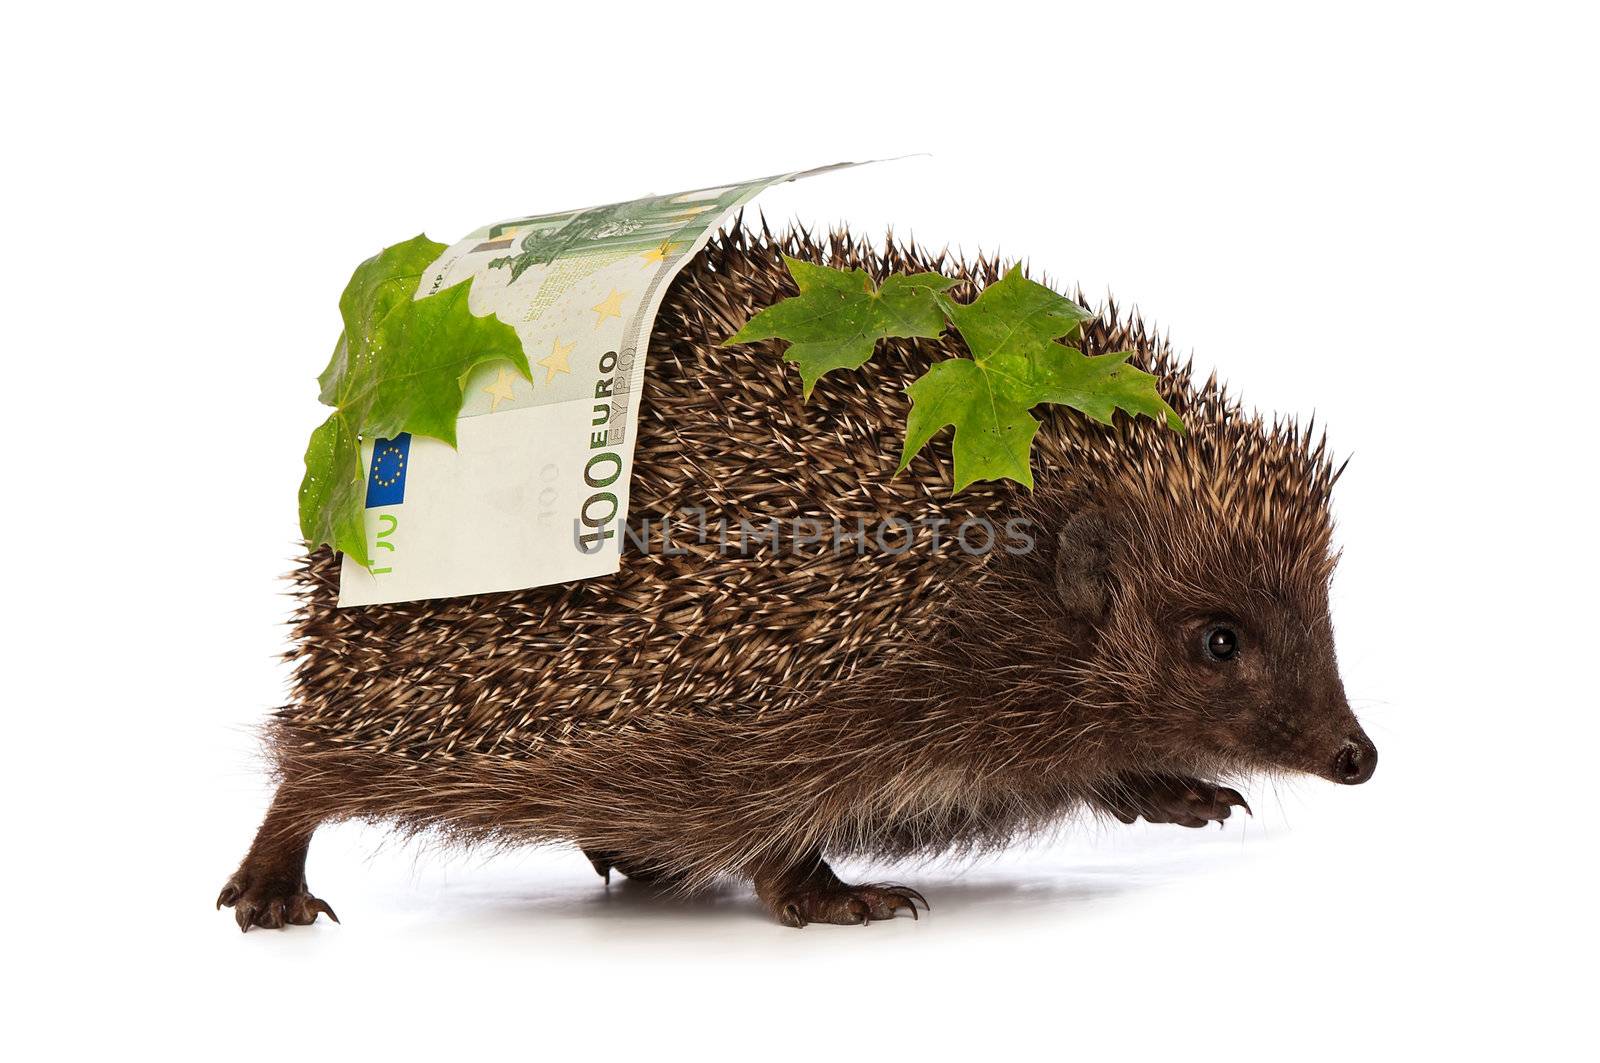 The hedgehog in motion hastens home from the bank carrying percent hundred euro profit